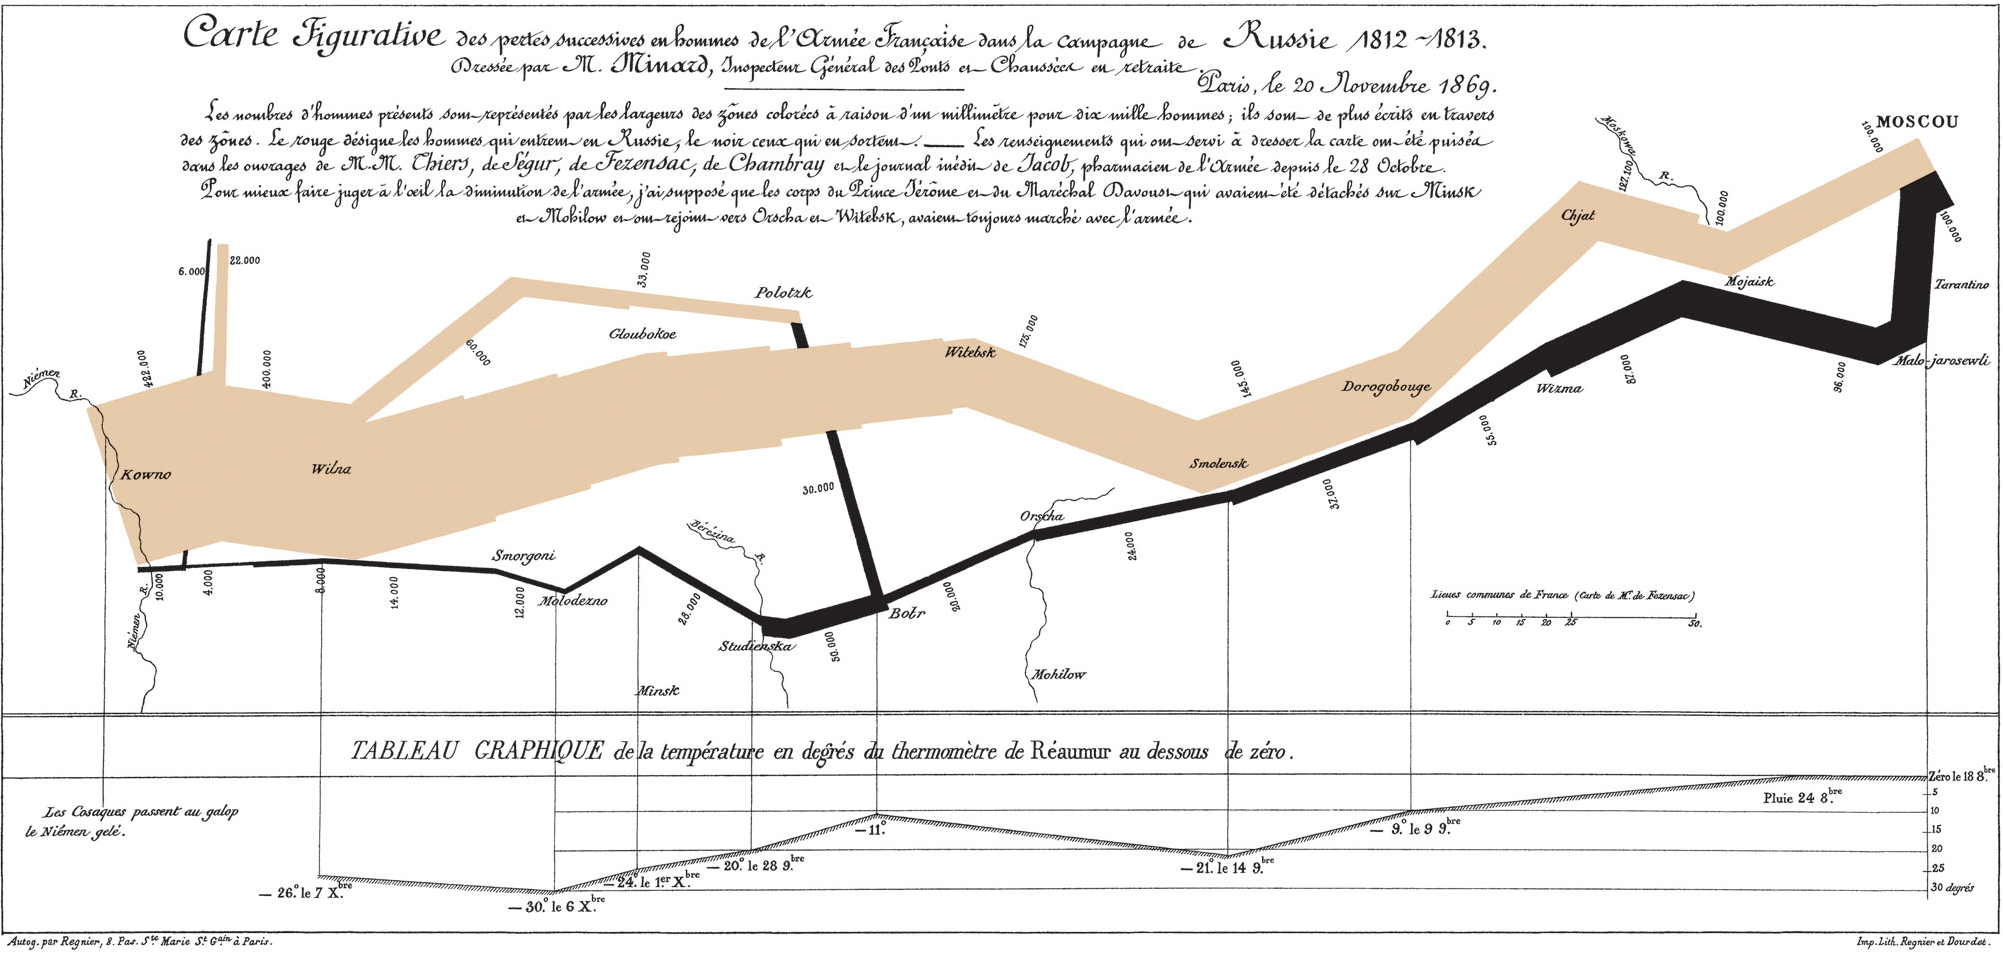 Charles Minard's 1869 chart showing the number of men in Napoleon’s 1812 Russian campaign army, their movements, as well as the temperature they encountered on the return path.